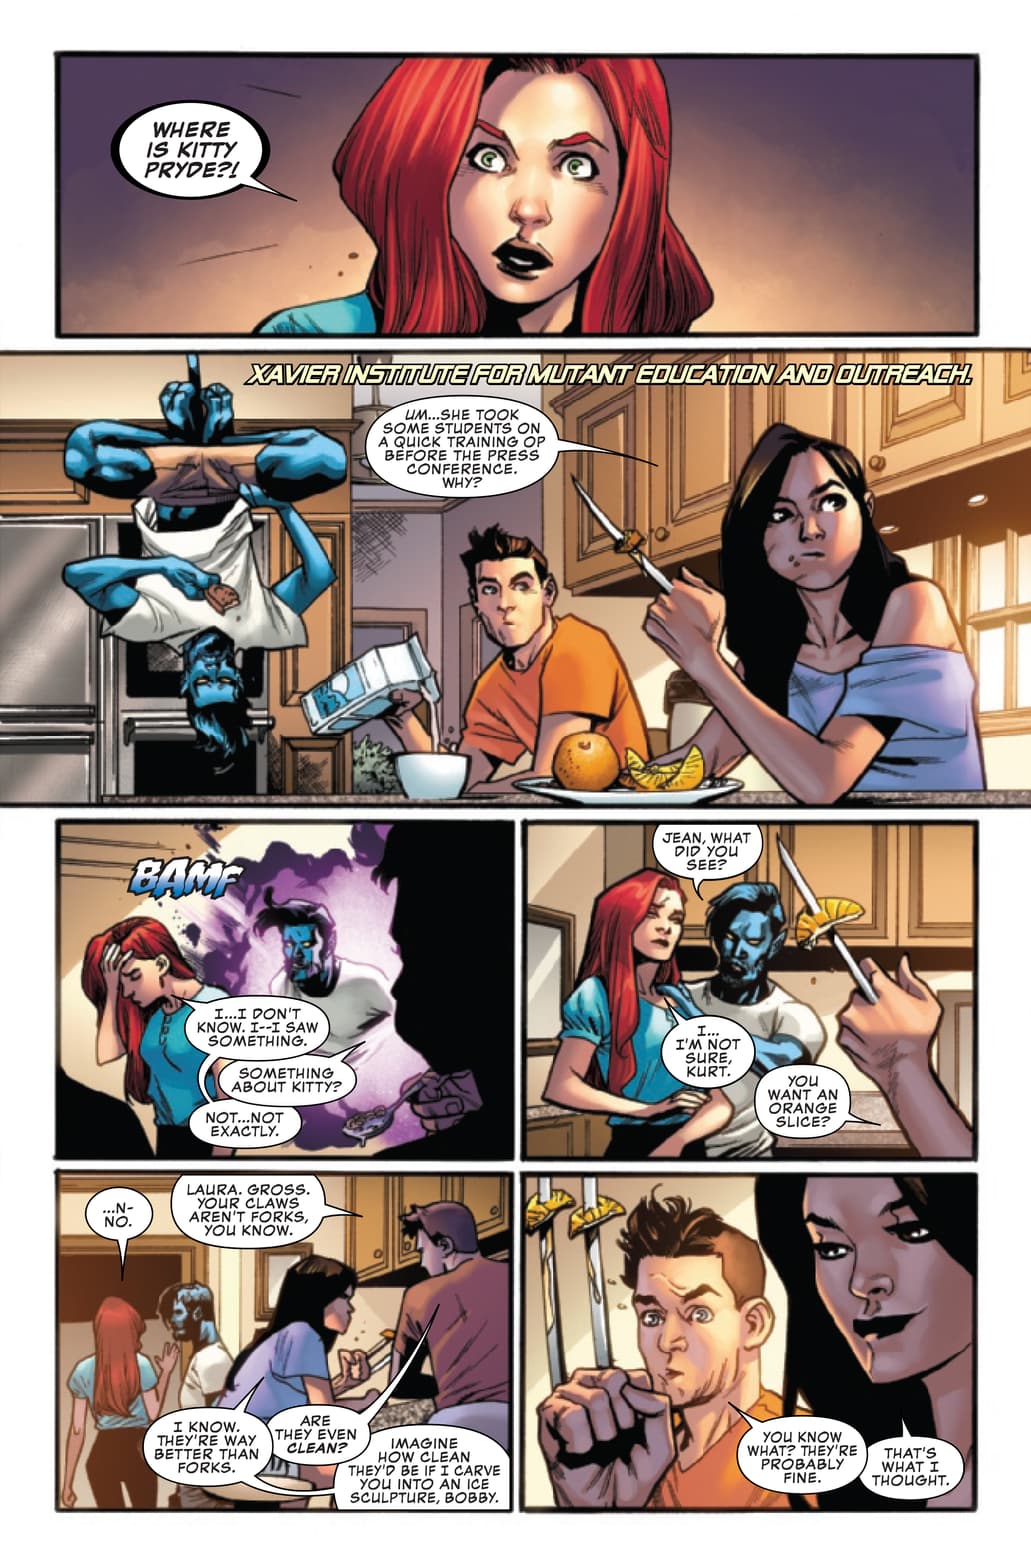 Preview page from Uncanny X-Men #1